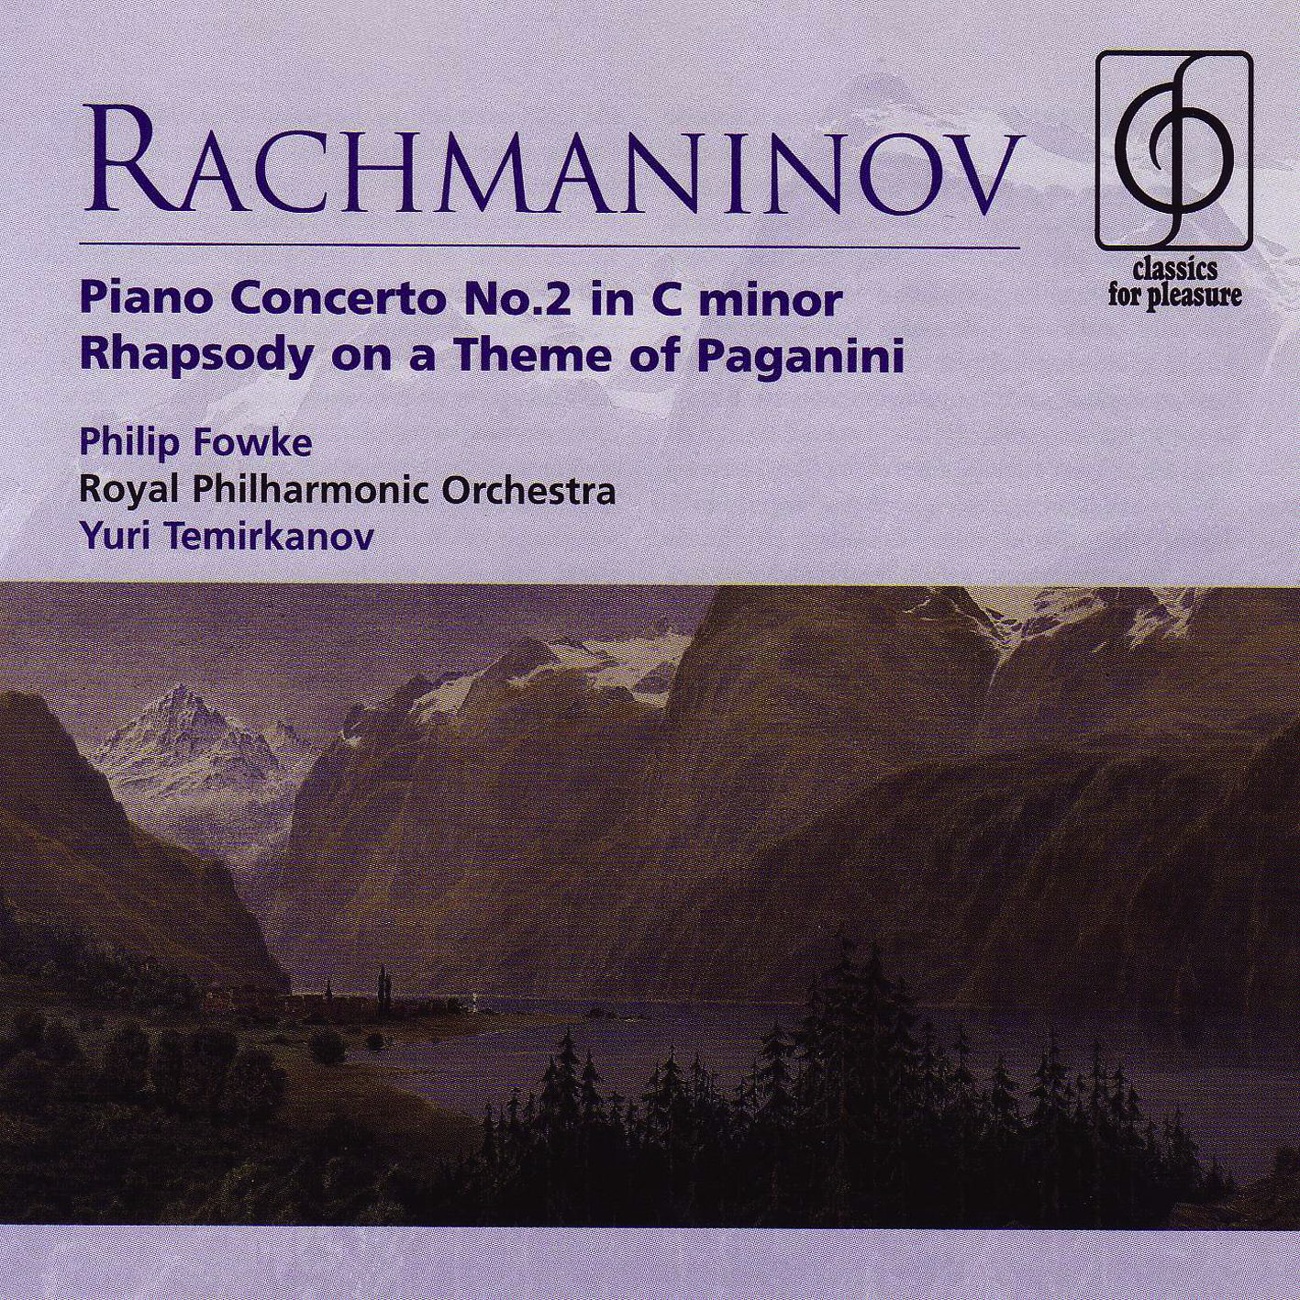 Rhapsody on a Theme of Paganini Op. 43: Variation XIII (Allegro)